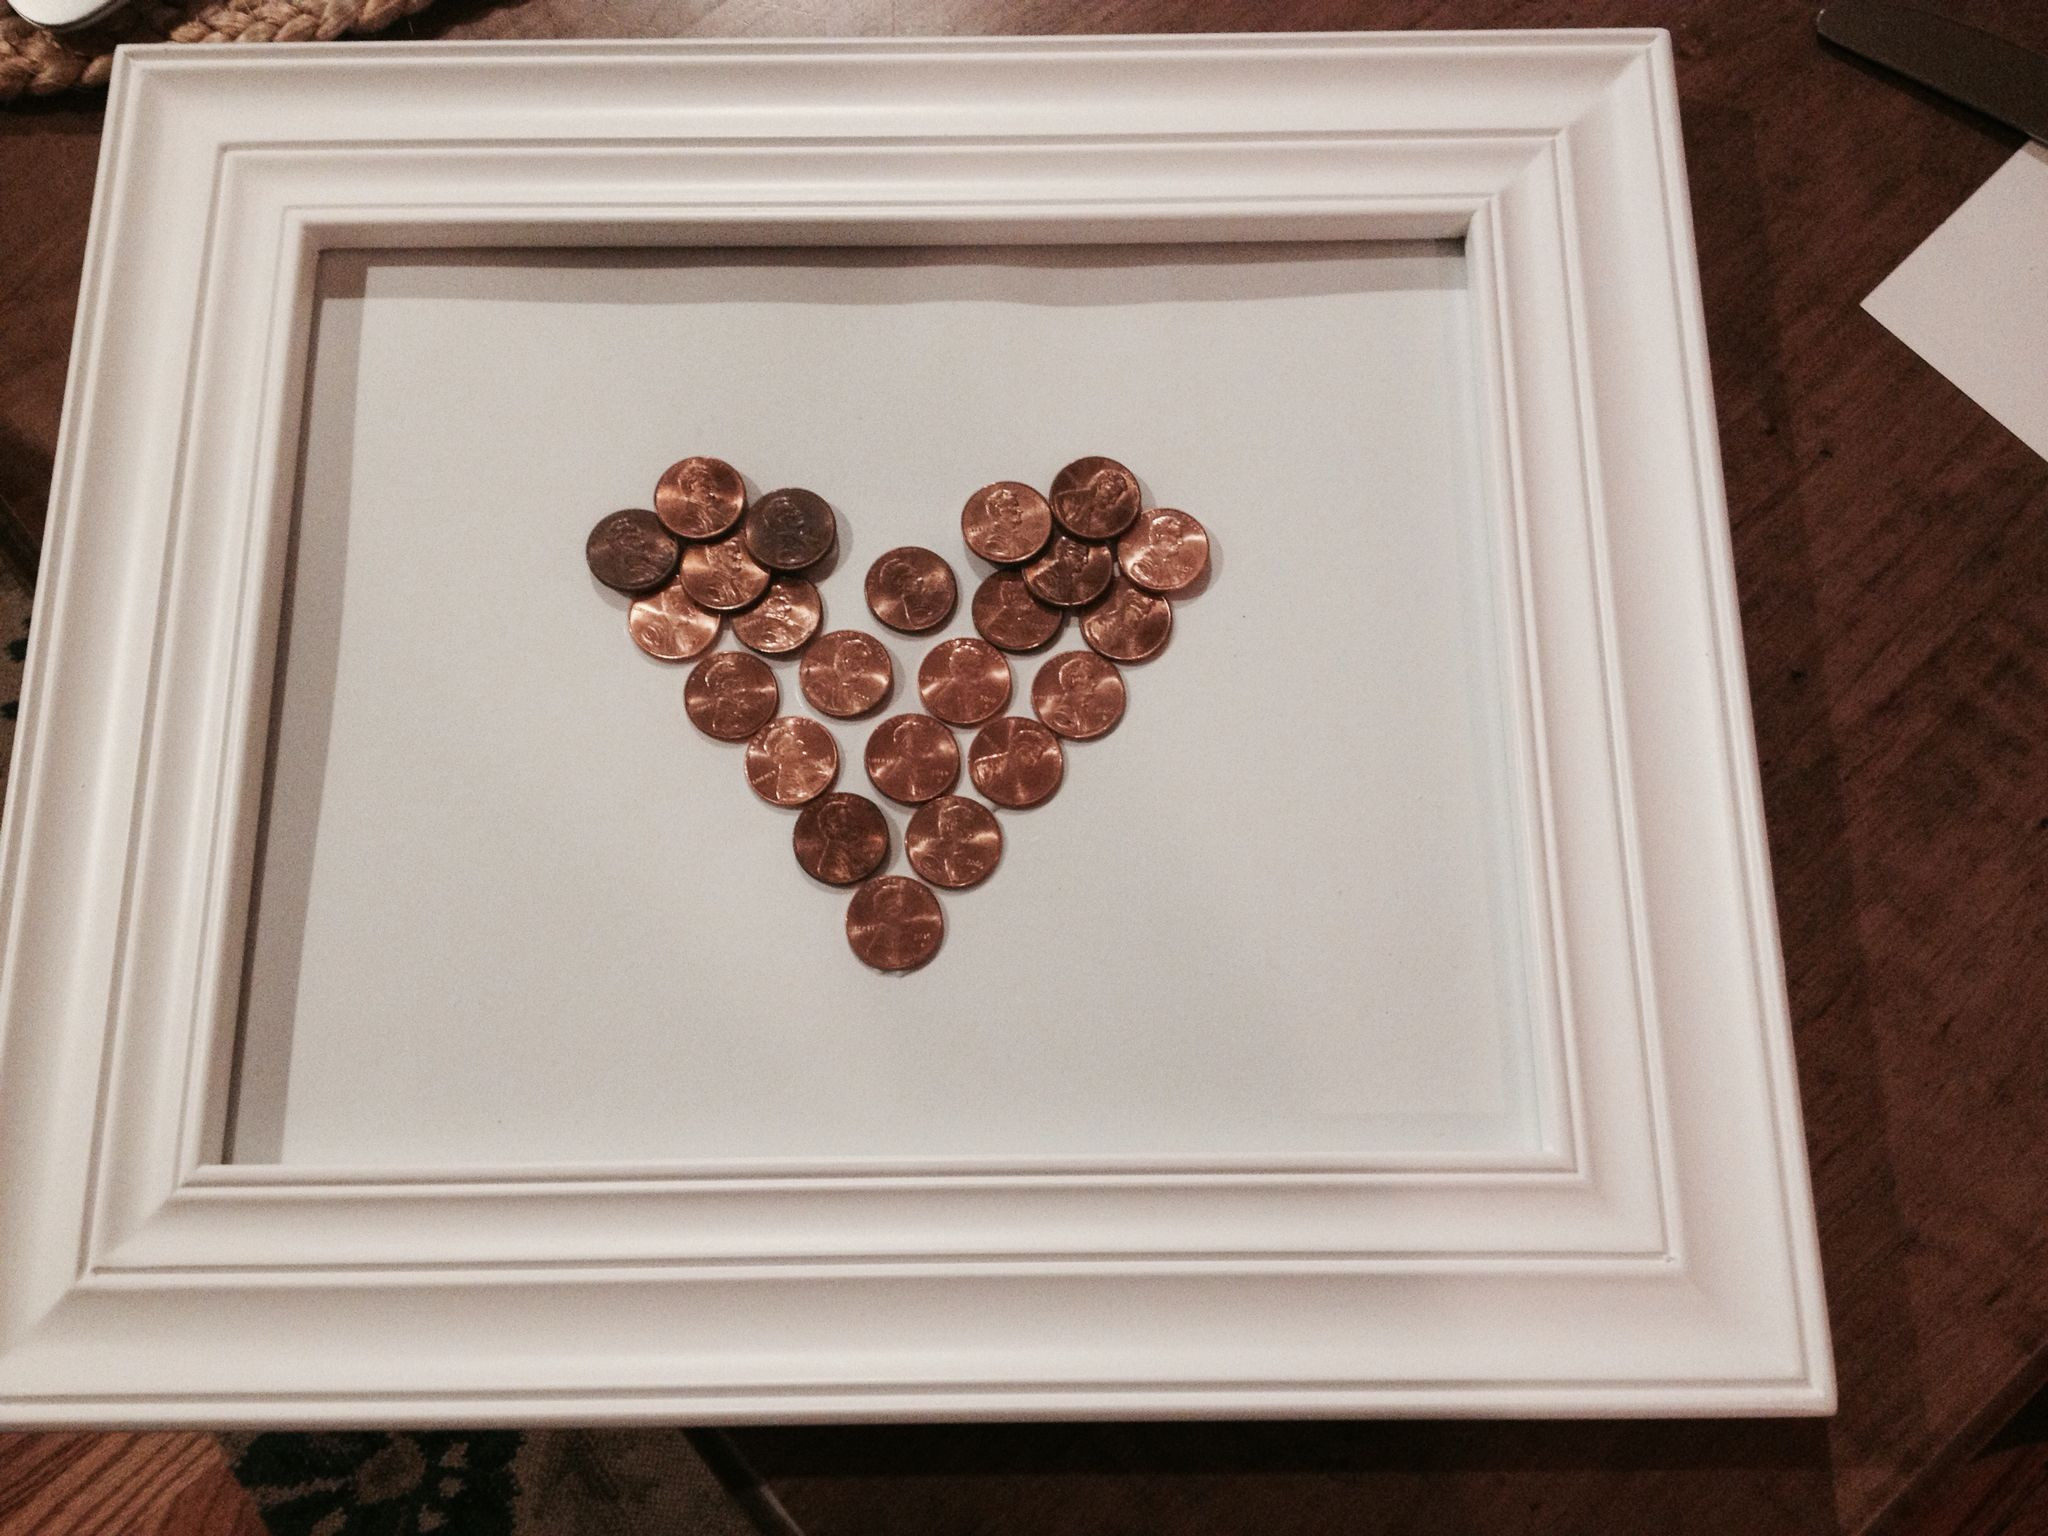 22Nd Wedding Anniversary Gift Ideas
 Copper Anniversary Made this for my husband for our 22nd